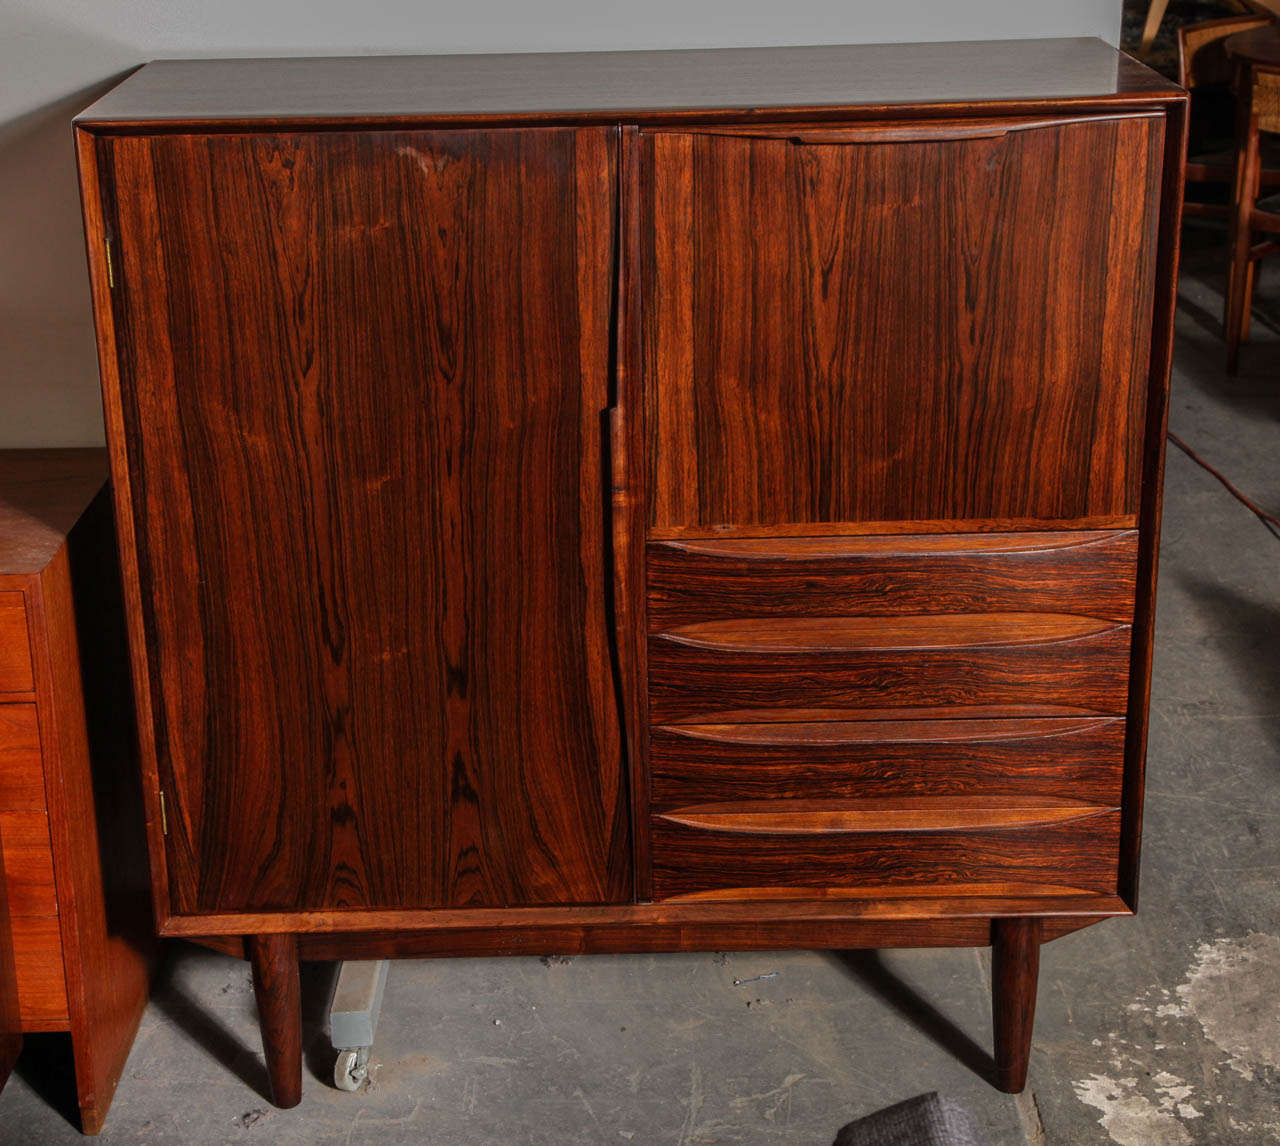 Vintage 1960s Rosewood Gentlemans Chest by Omann Jun.

This Vintage Wardrobe is in like-new condition. The four drawers, shelves and drop down section is there to help you organize your clothing storage needs. The rosewood here is an excellent